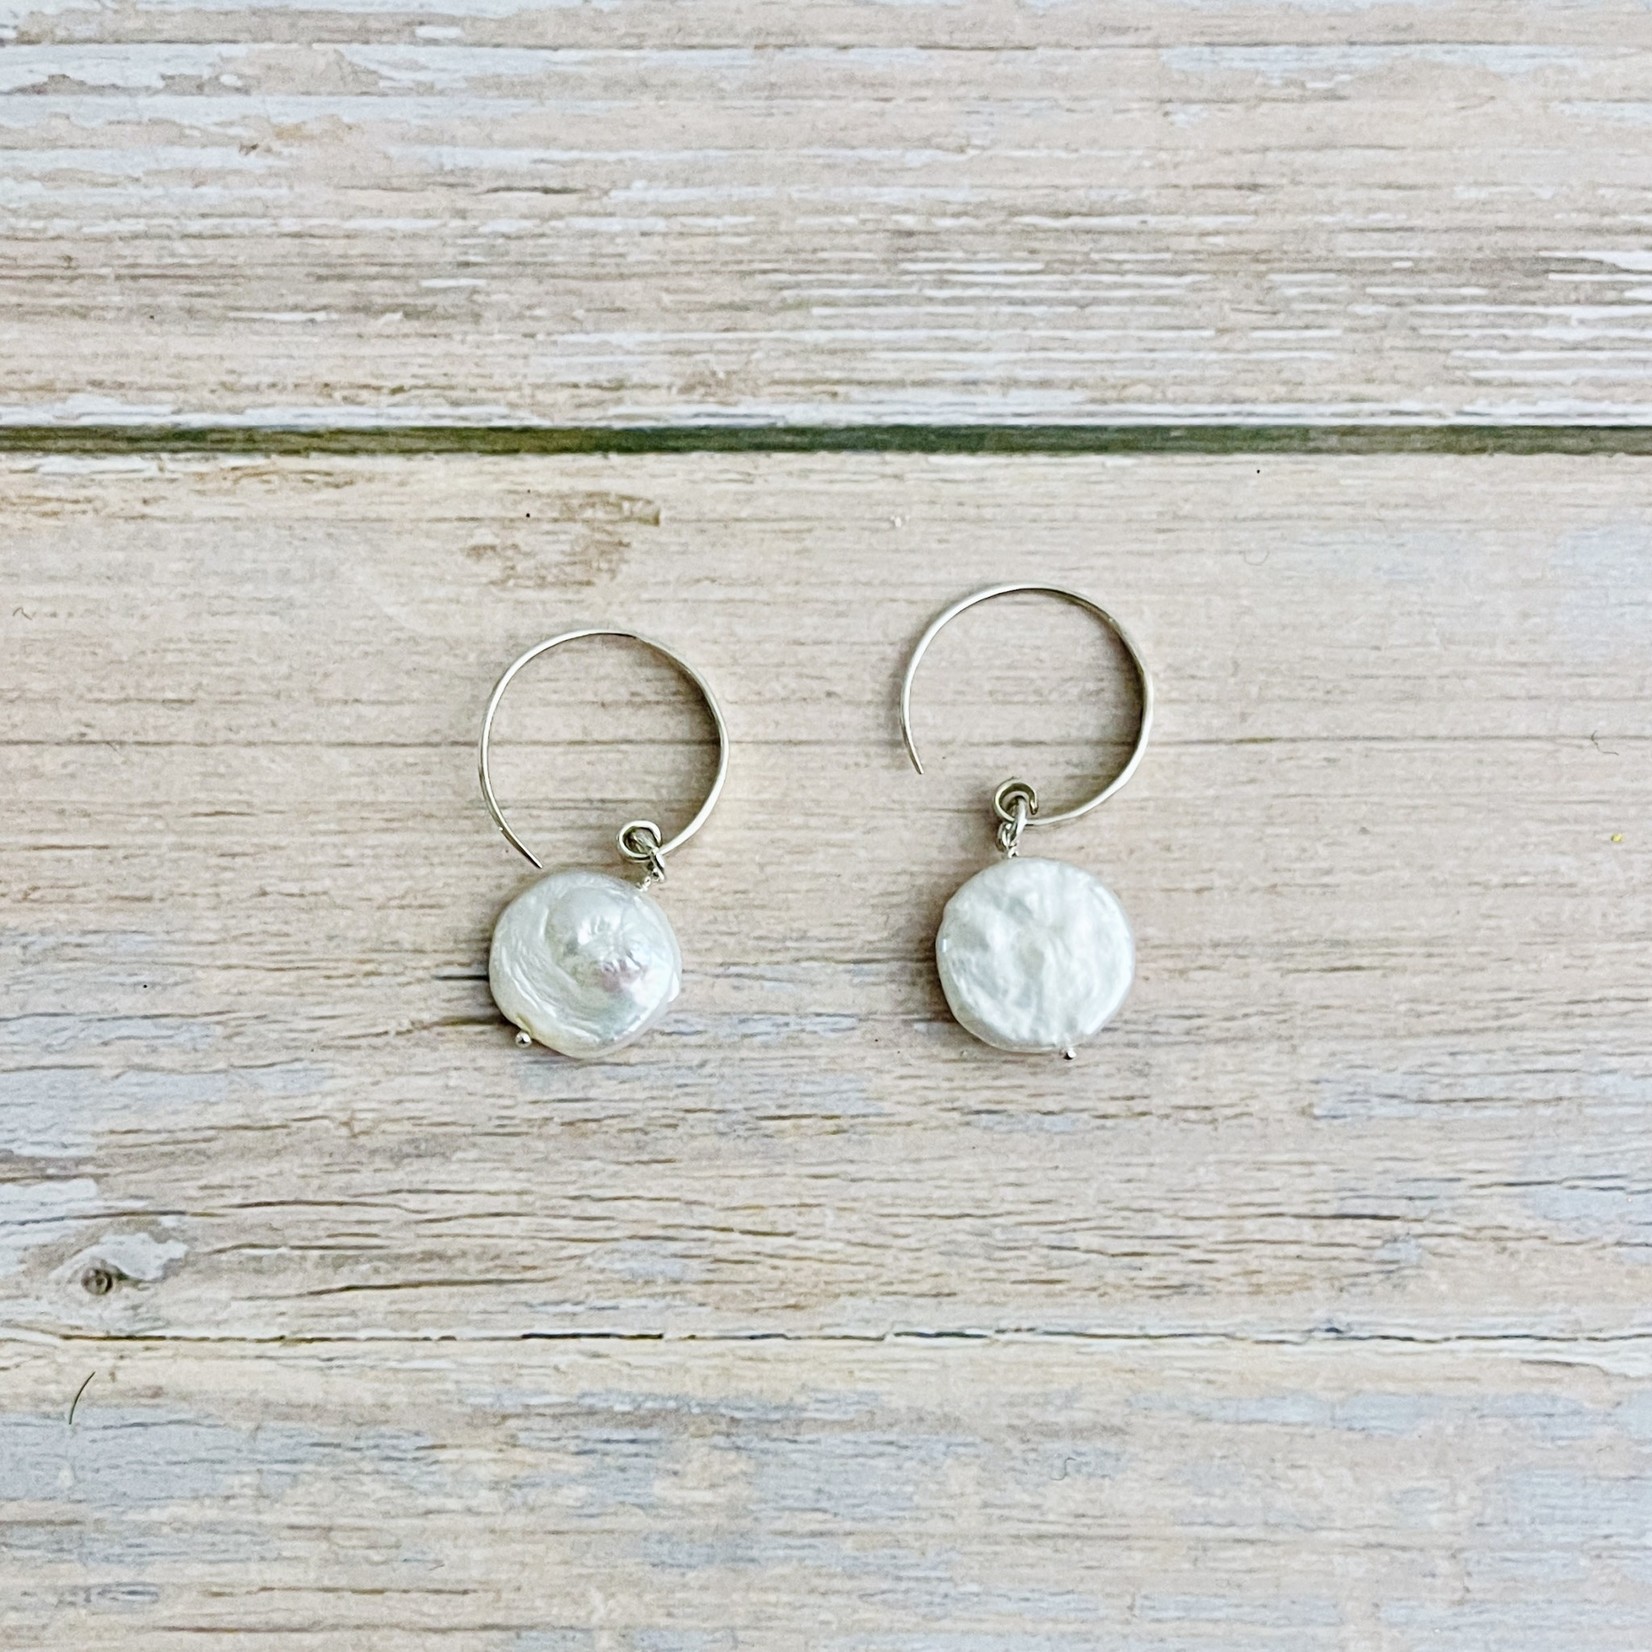 Handmade Silver Earrings with white coin pearl, hammered earwire